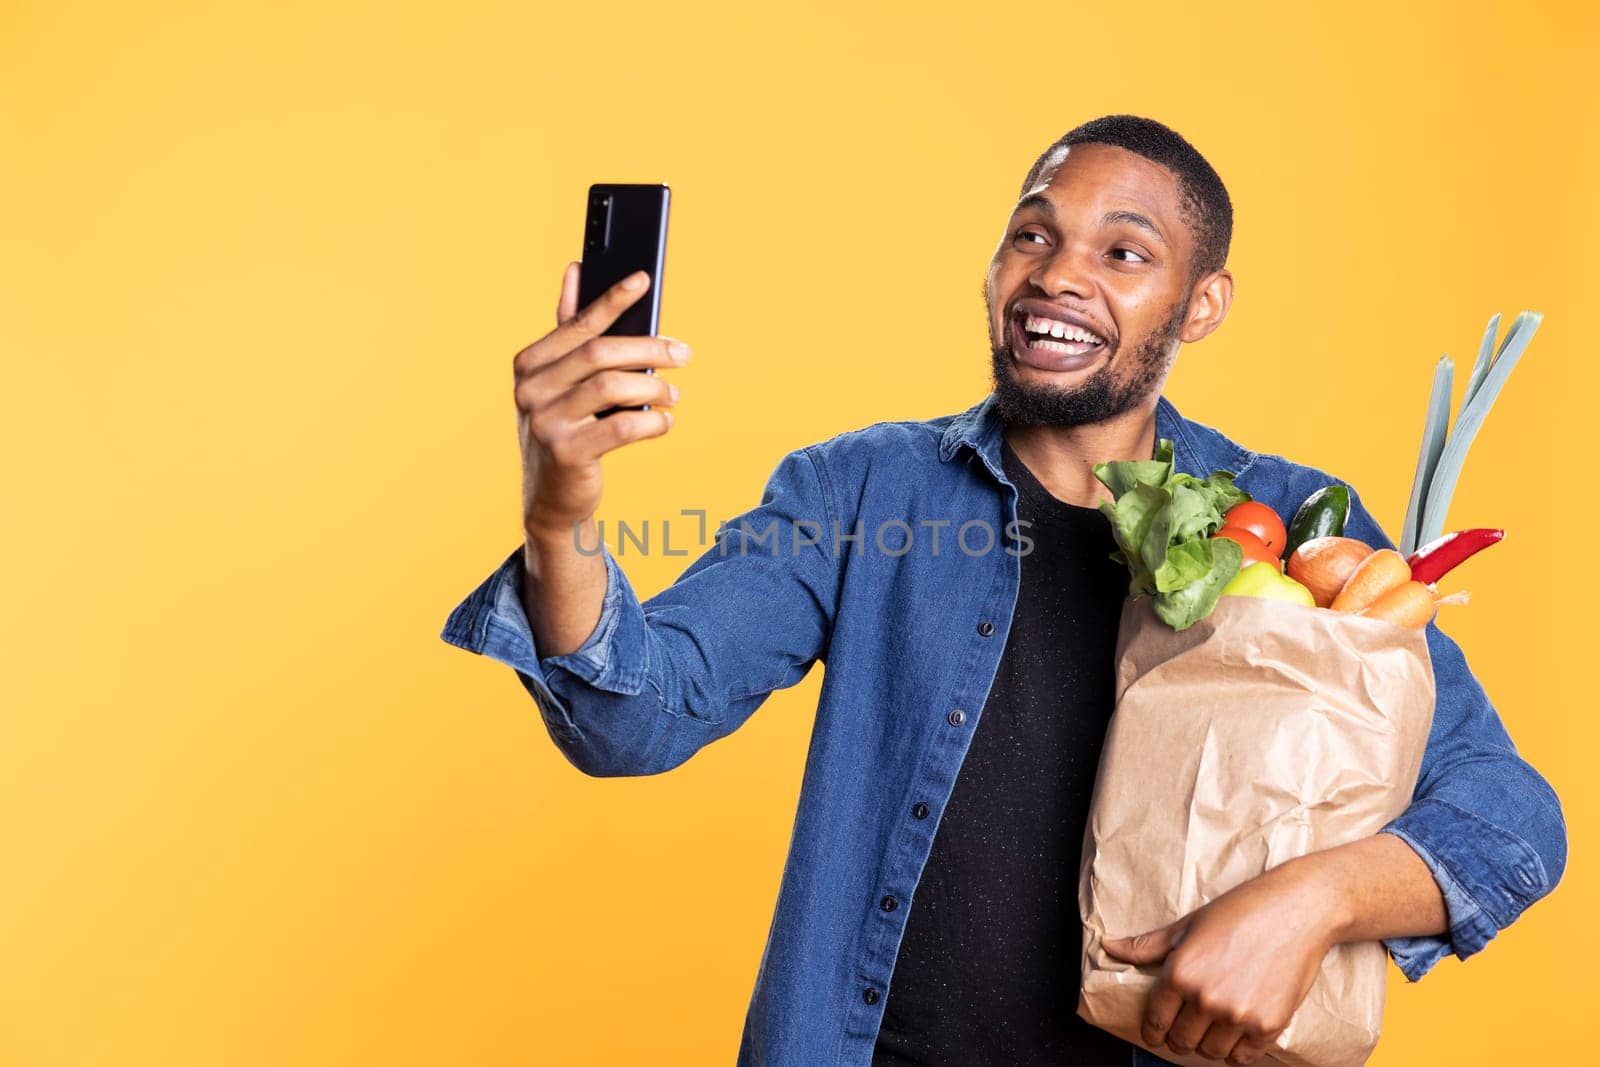 Smiling positive guy taking a picture with his bag of fresh produce by DCStudio